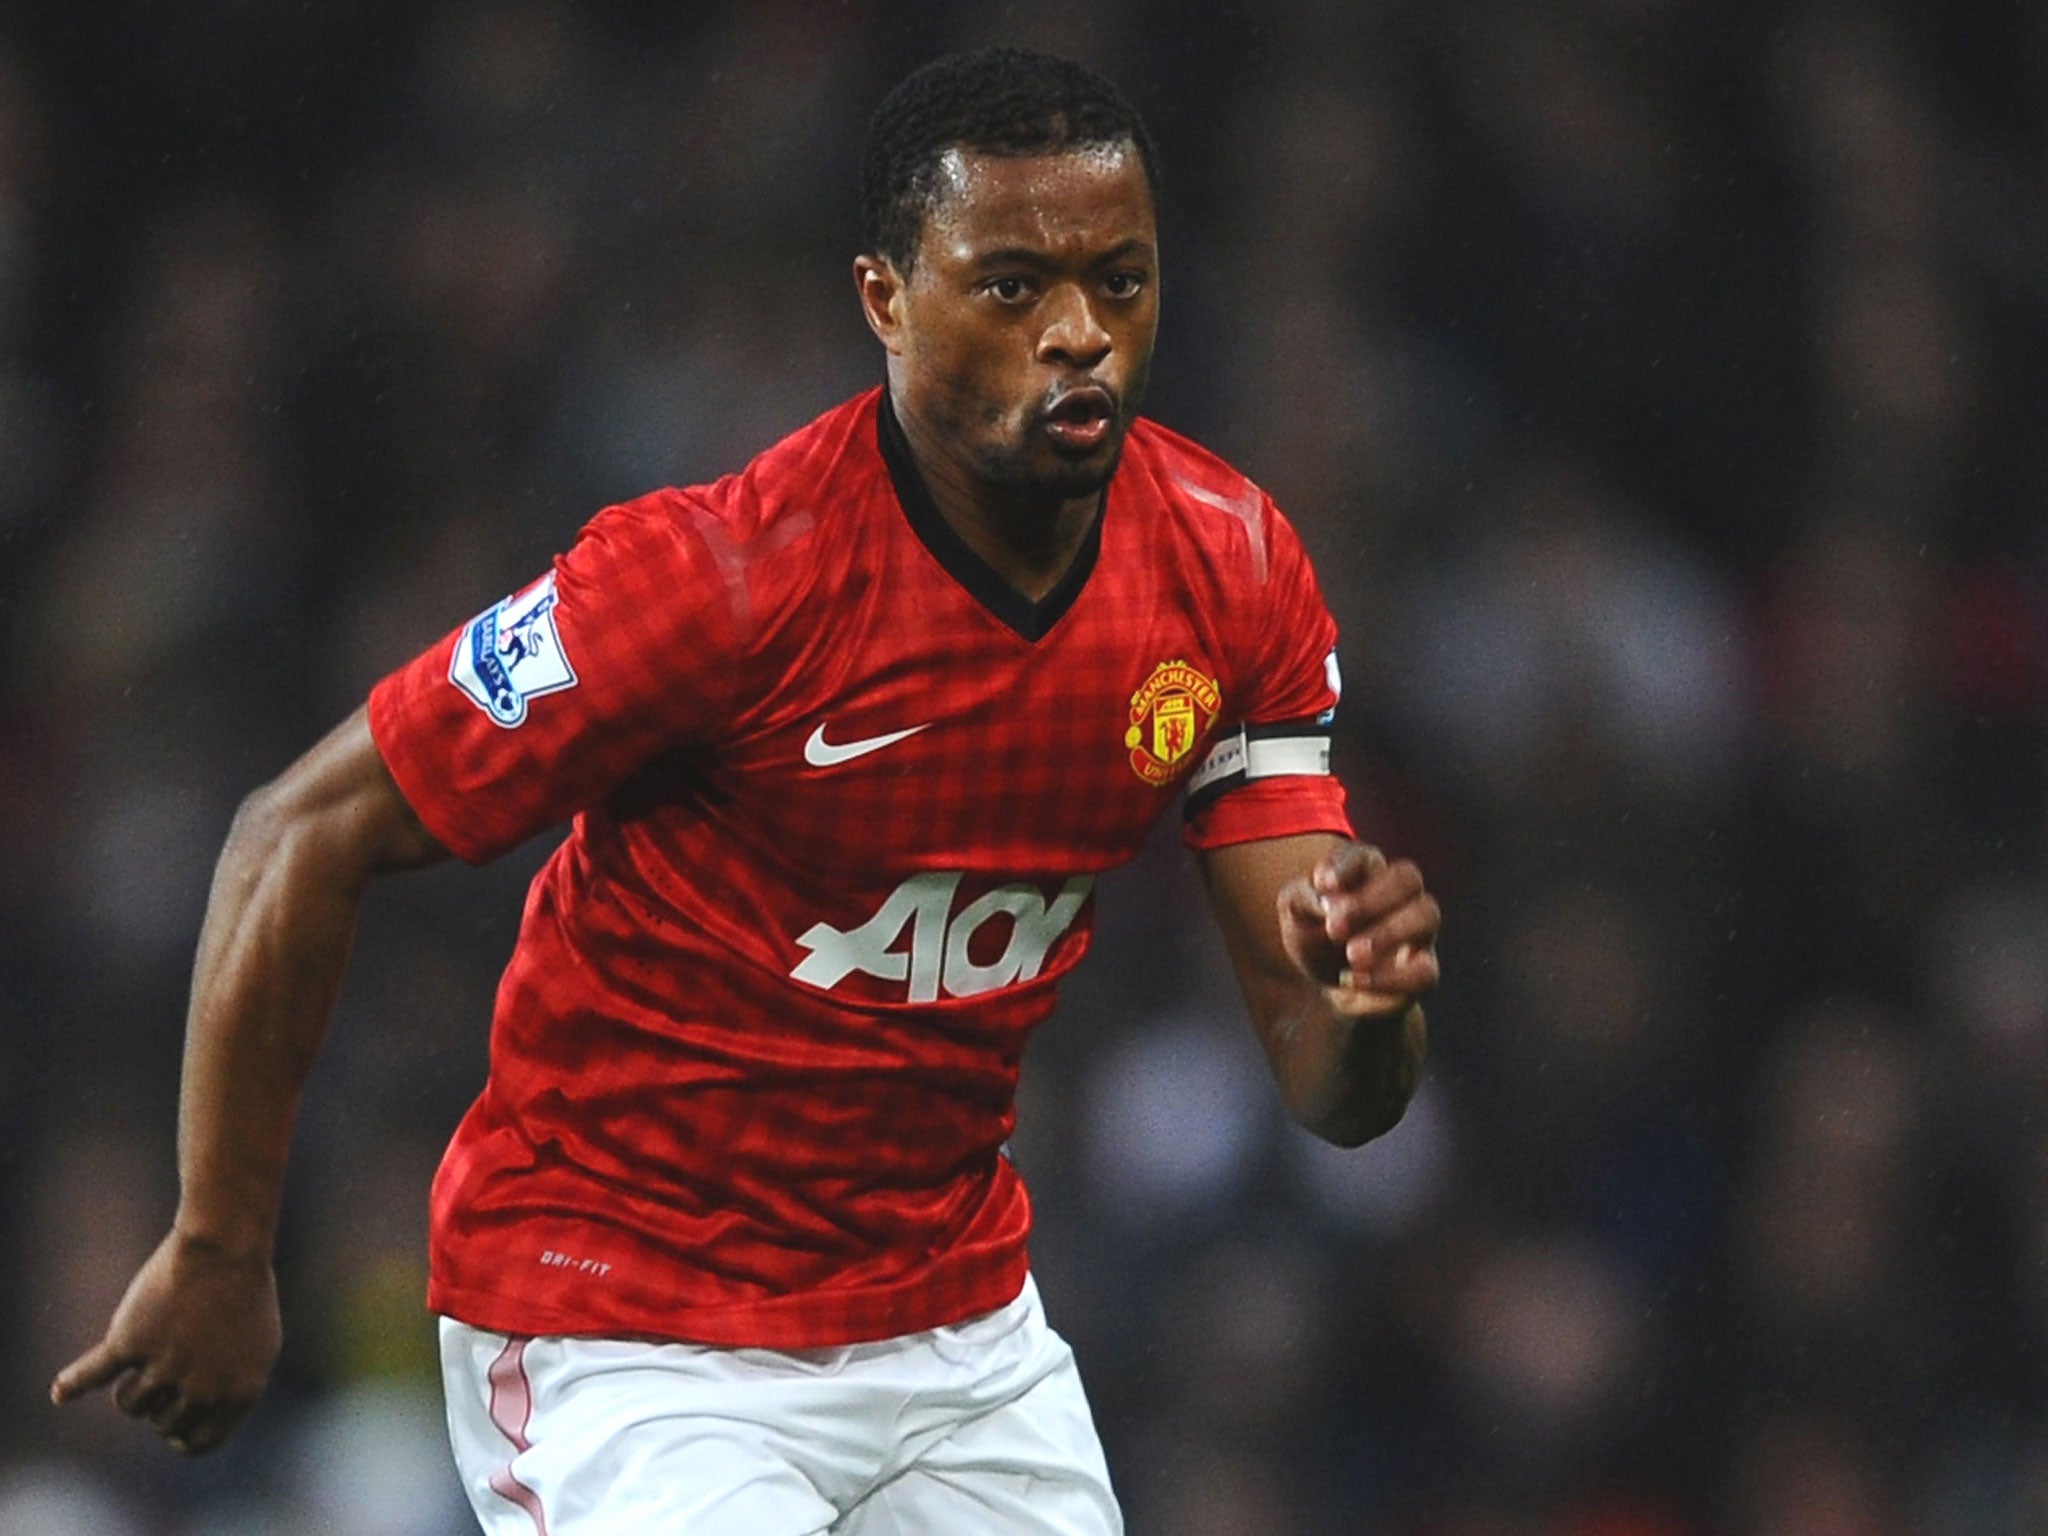 Patrice Evra might be tempted by a lucrative move to PSG